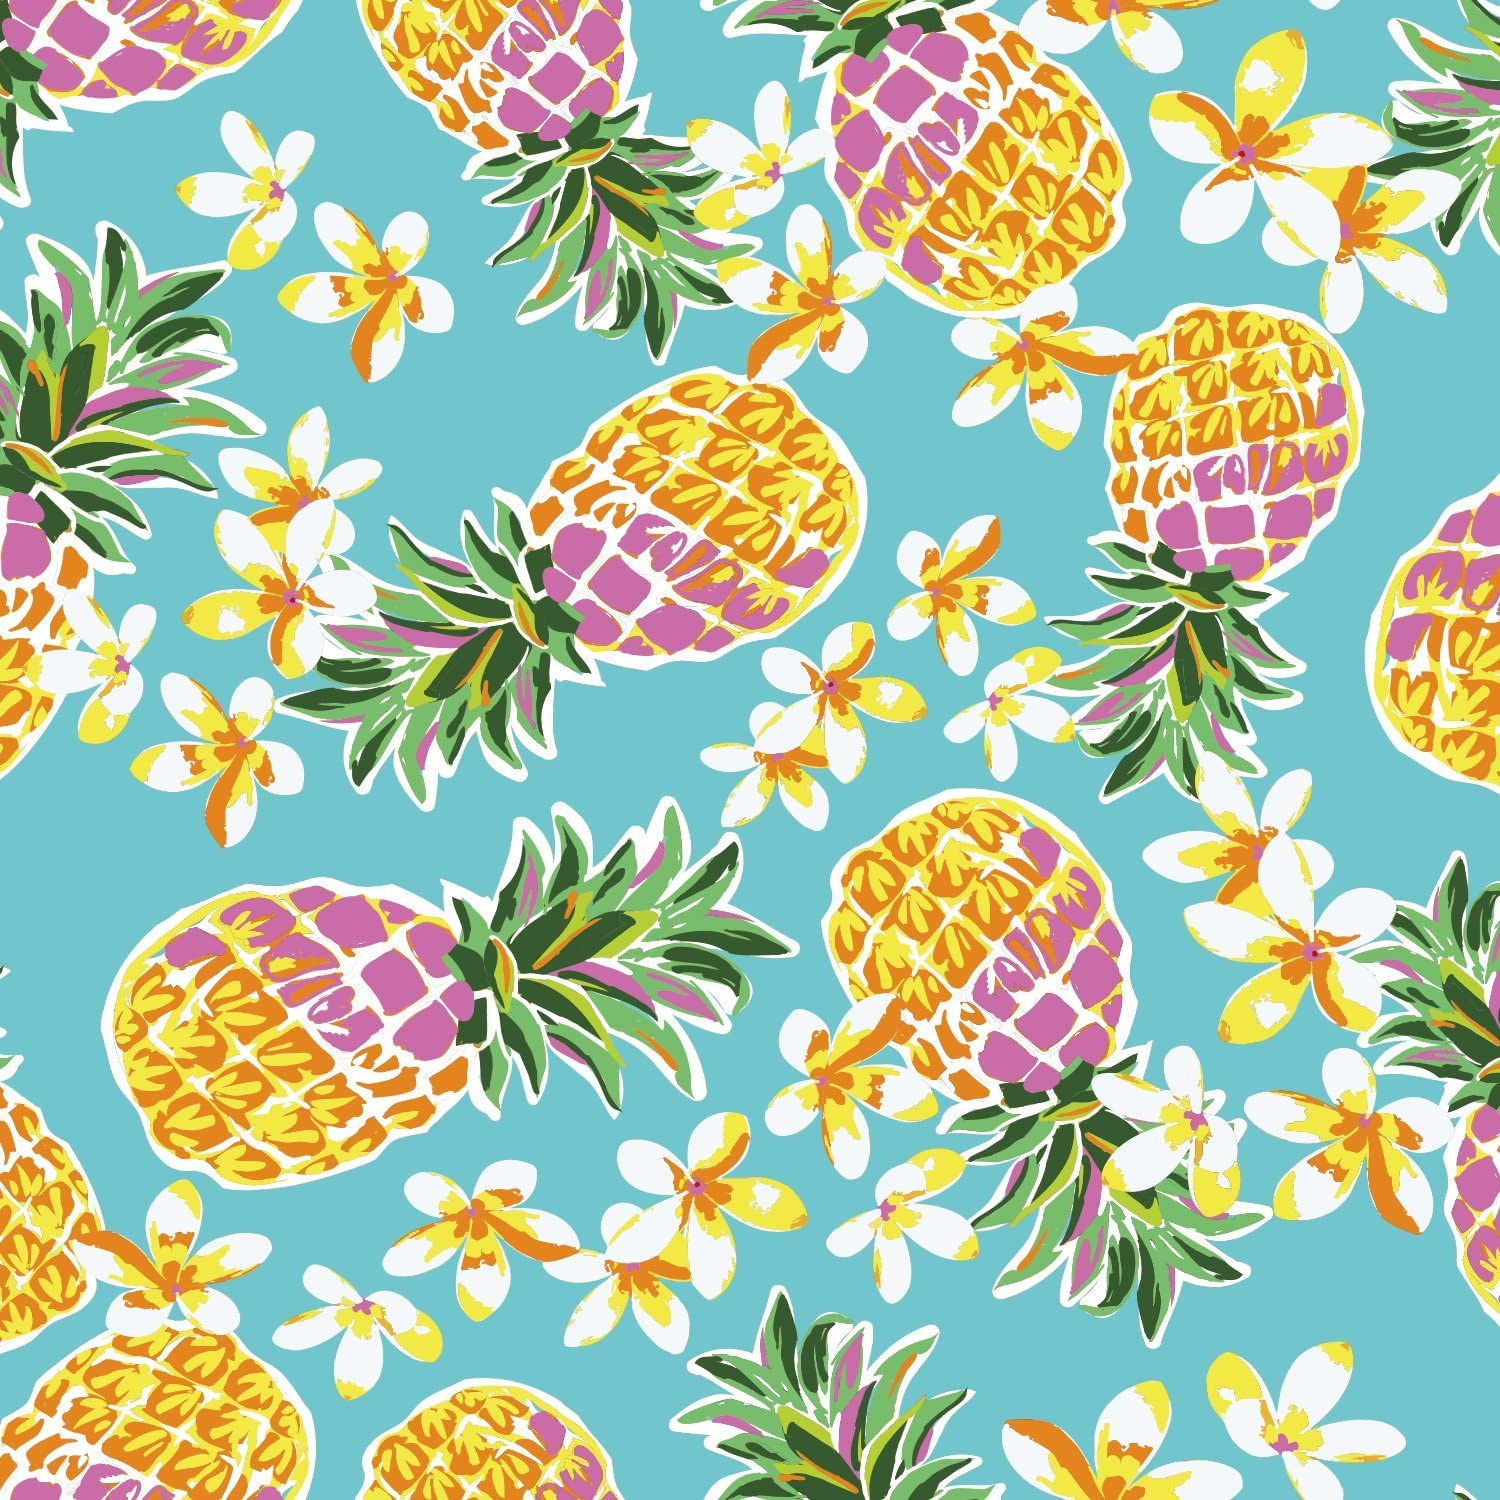 Locker Wallpaper Pina Colada Pineapple Print, Hawaii Look, Great Gift for Students, Colour Turquoise / Yellow / Pink: Amazon.co.uk: Kitchen & Home